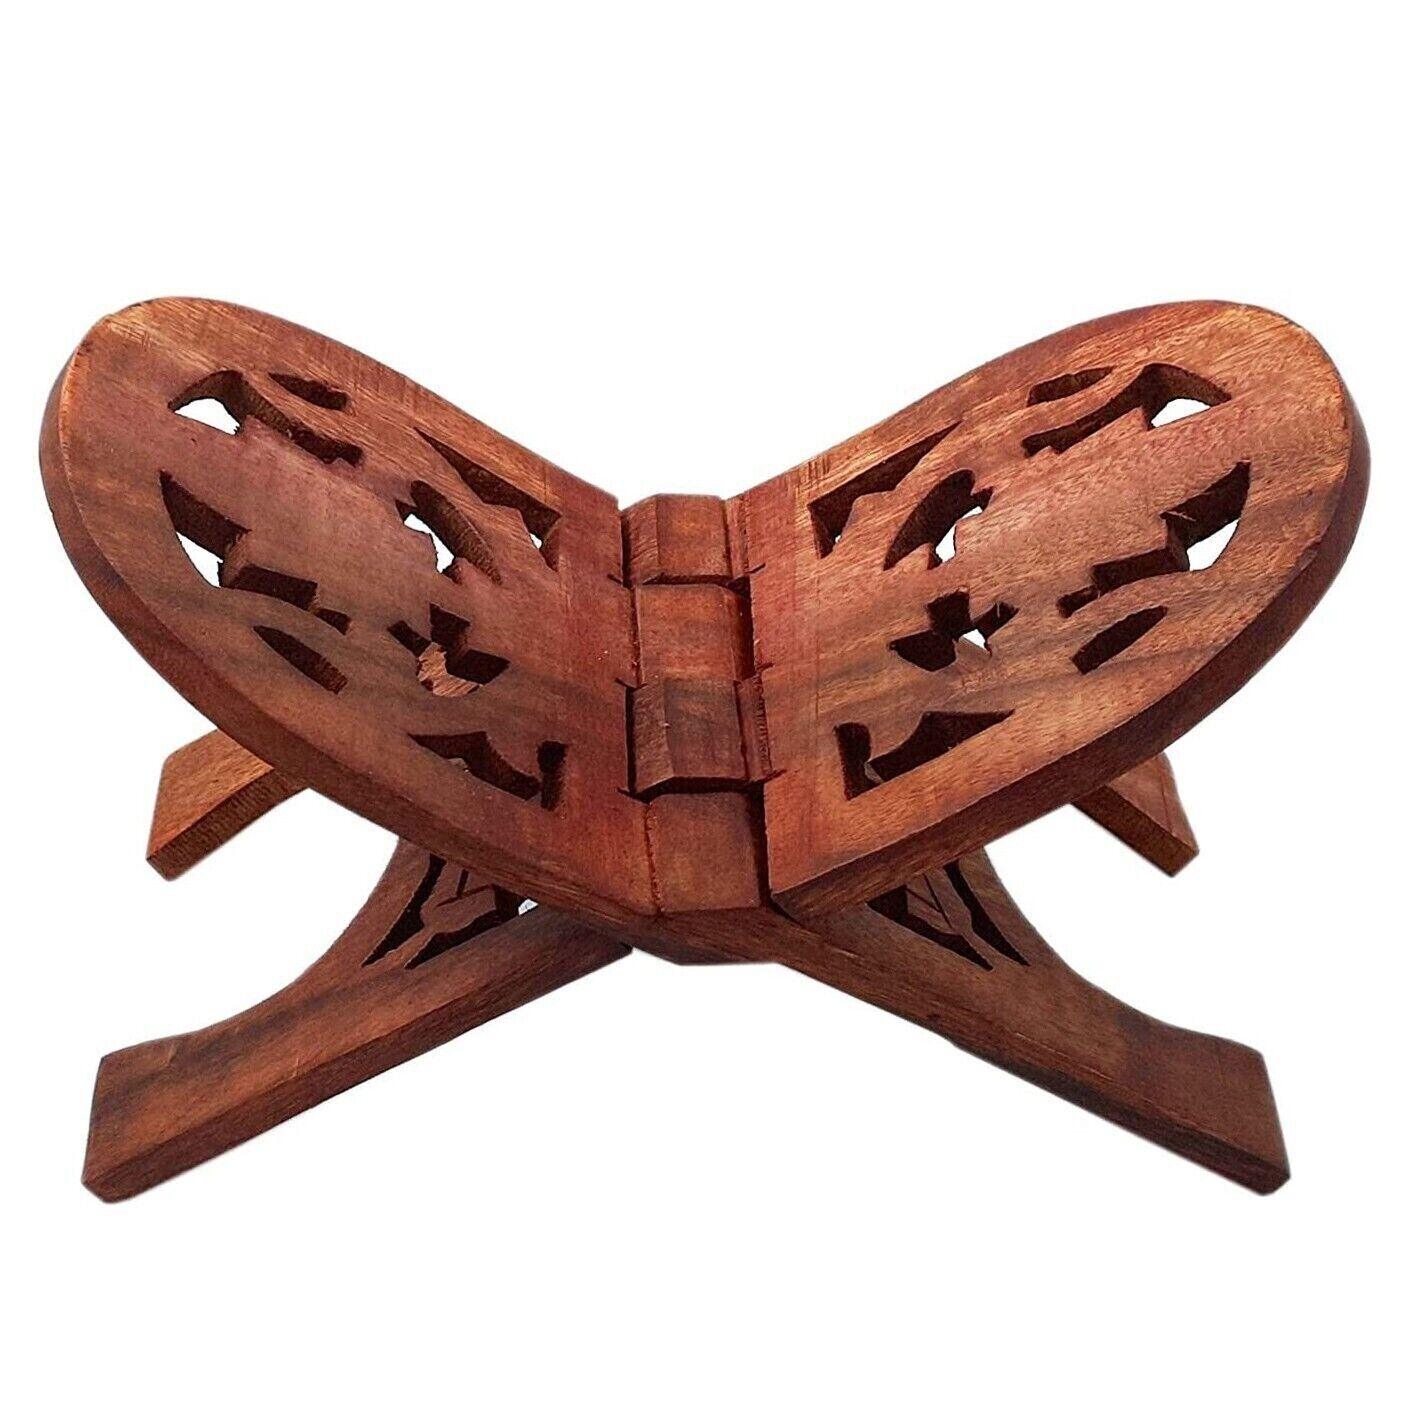 Handmade Assorted Wooden Polished Rehal/Qur'an Stand For Reading Books (Brown) - Walgrow.com